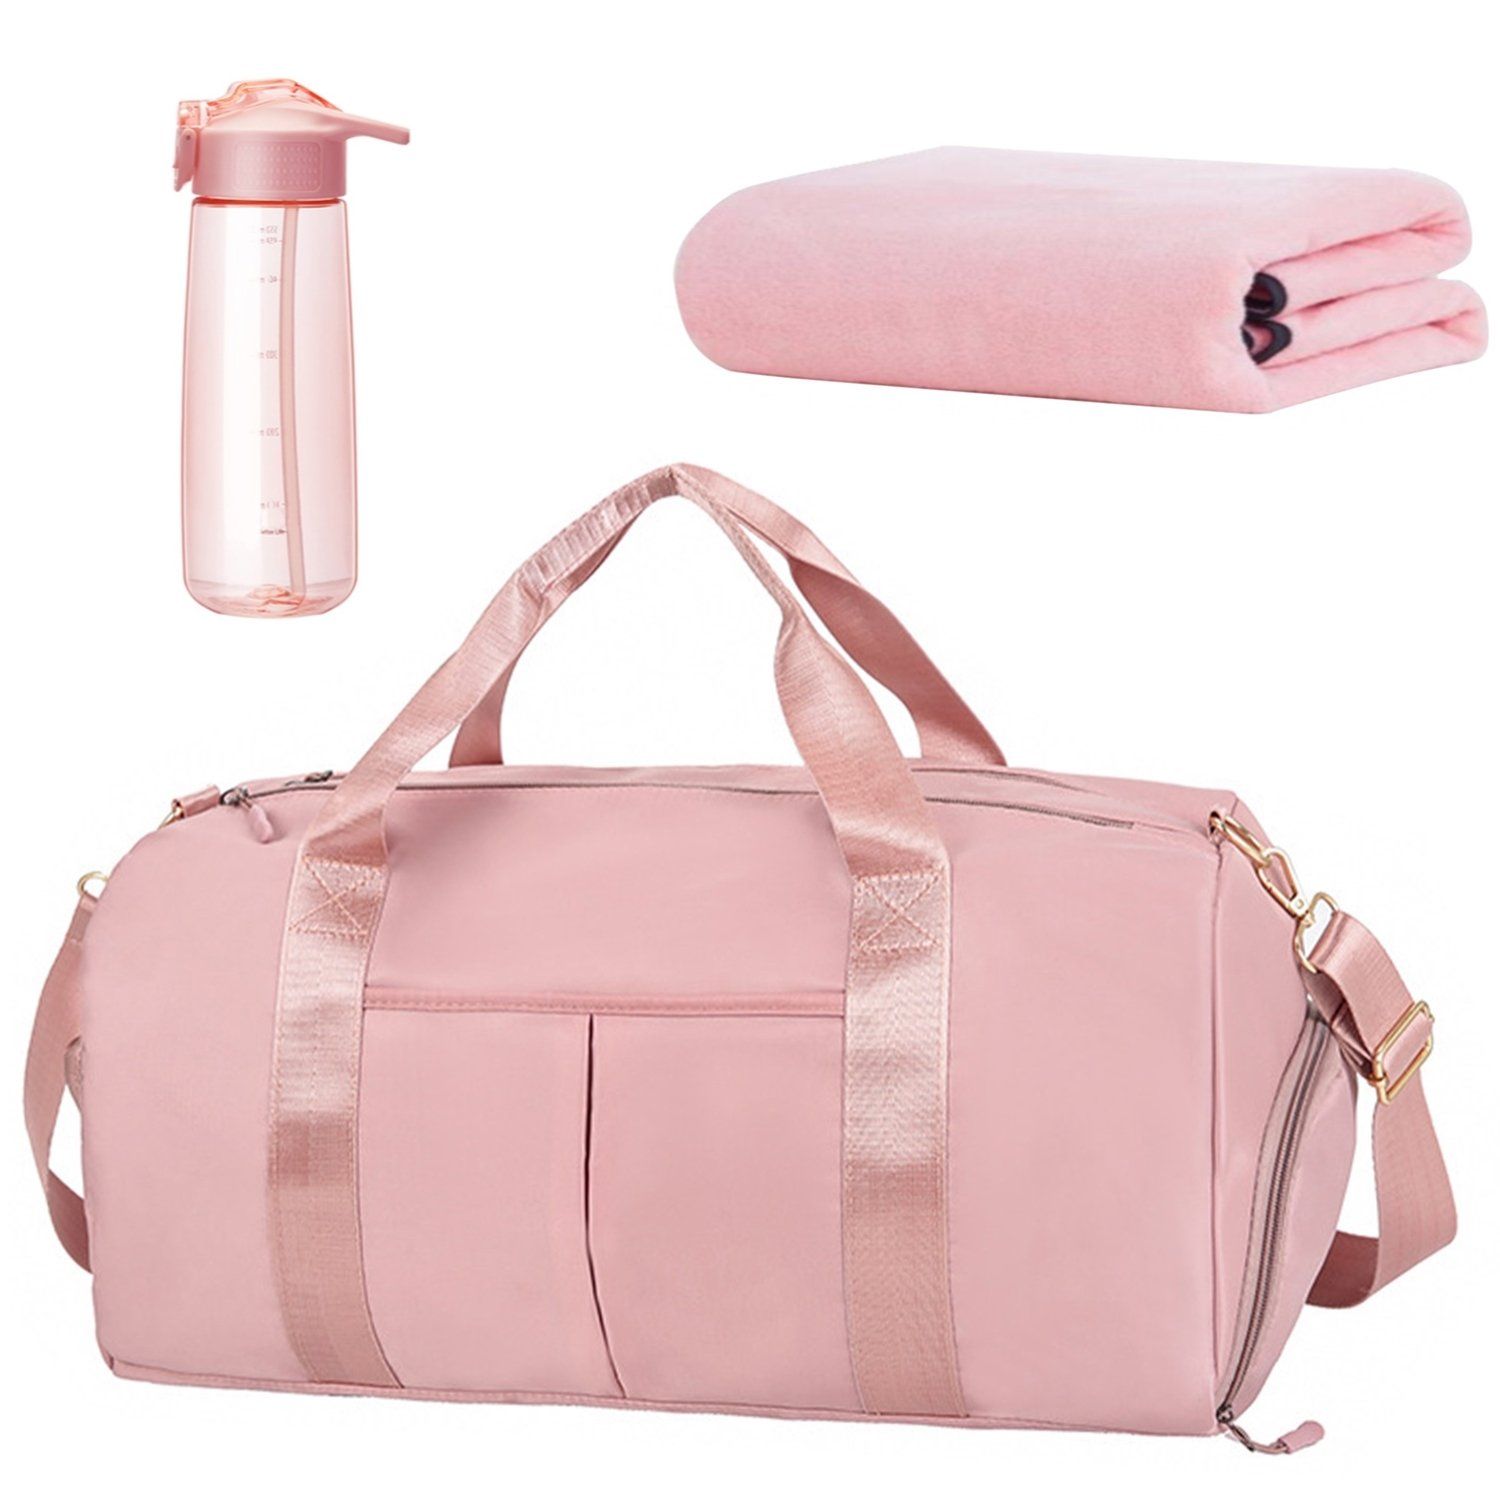 Lady's Gym Bag with Microfiber Towel & Water Bottle Set